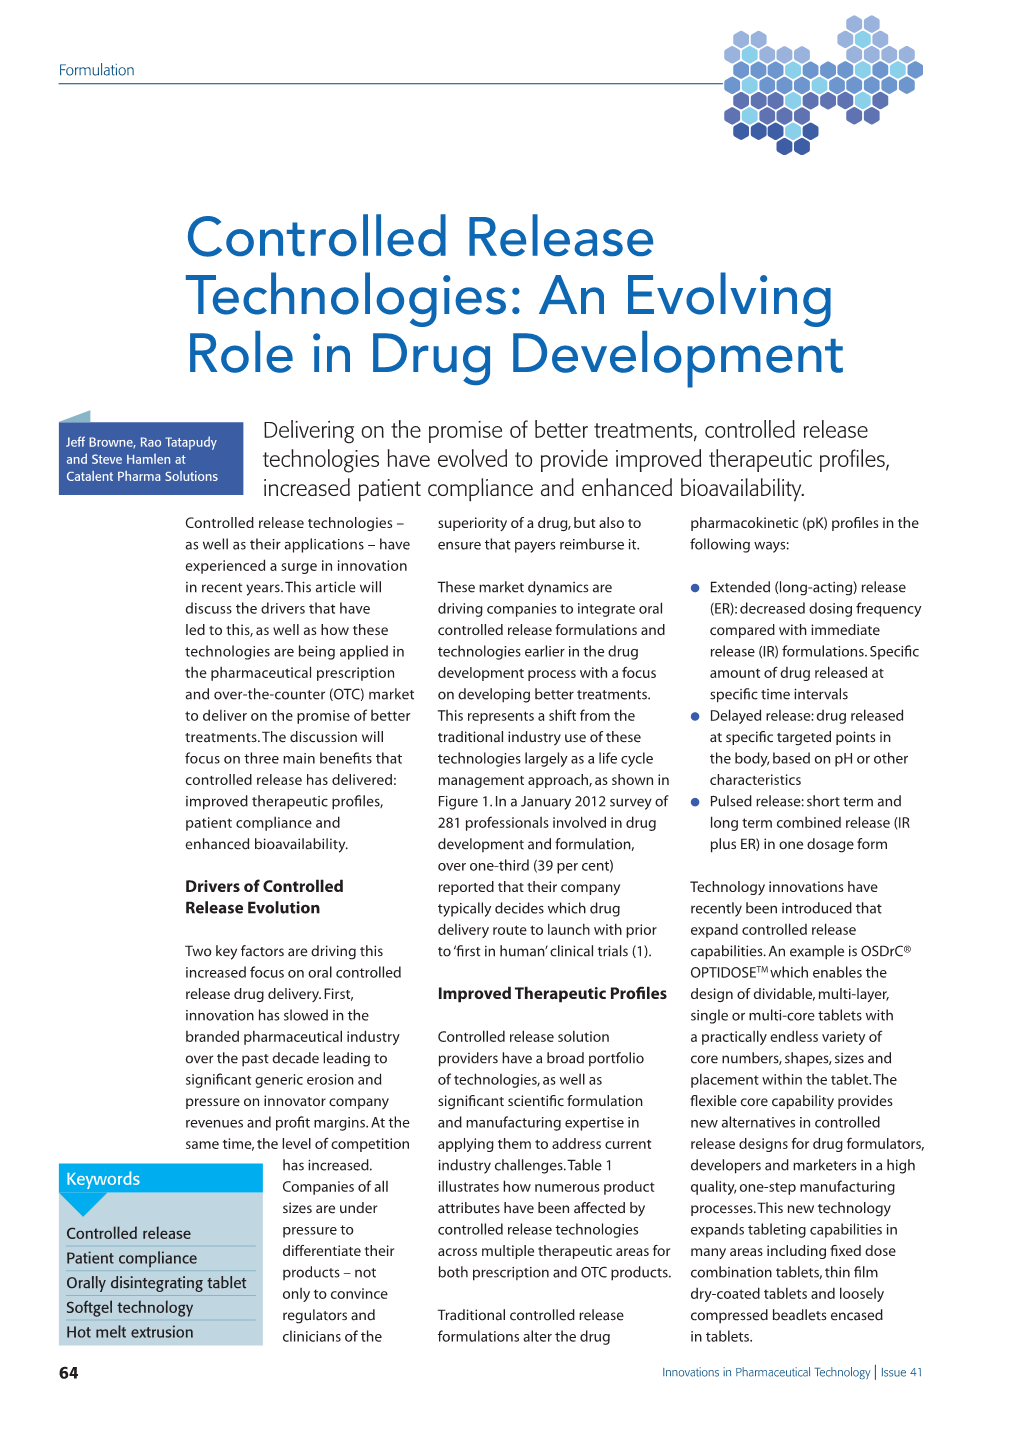 Controlled Release Technologies: an Evolving Role in Drug Development